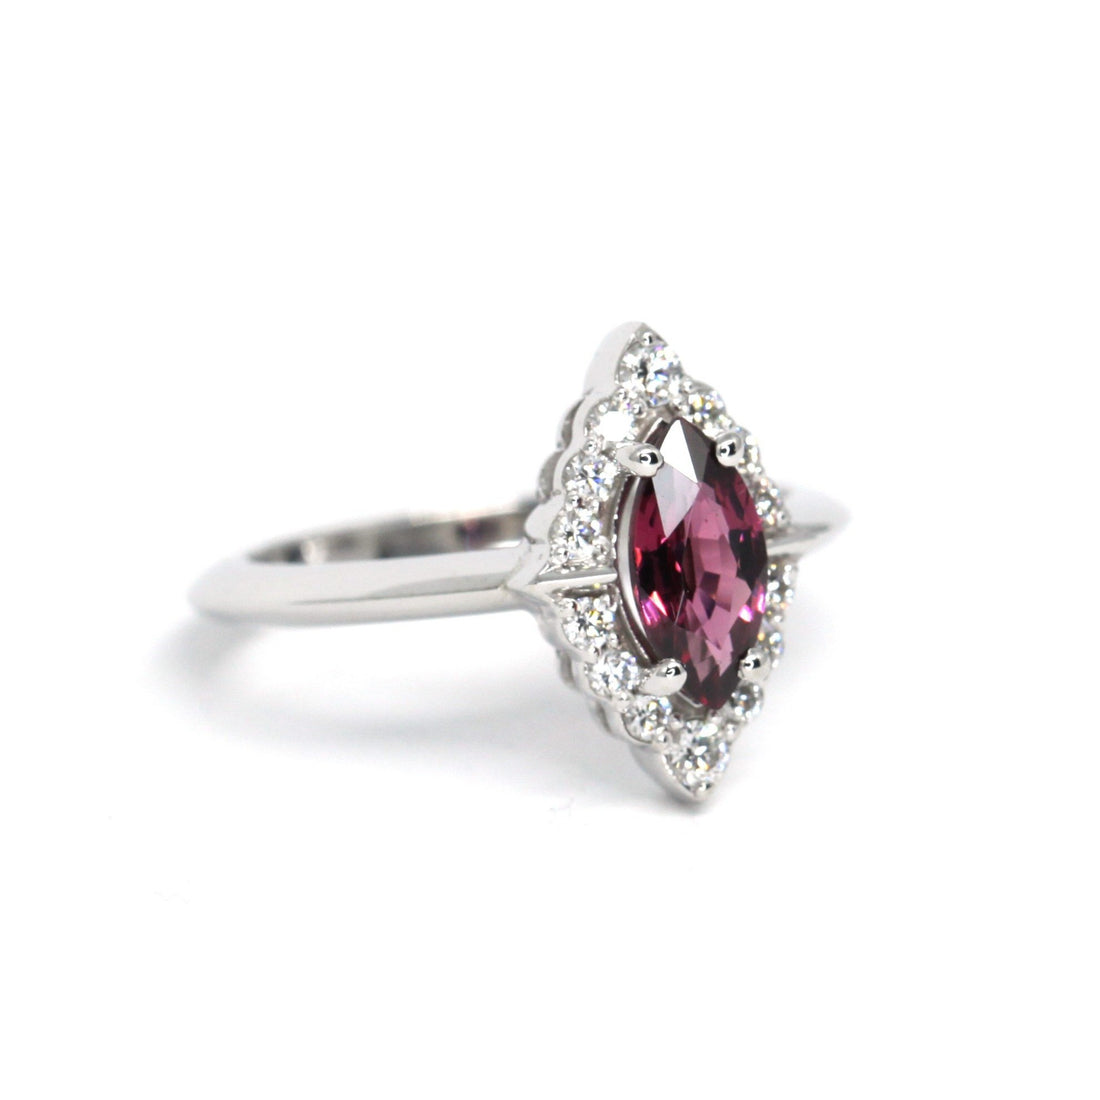 Side view of maquise shape red rhodolite garnet modern engaegement ring small white edgy diamonds jewelry montreal made in canada white gold red gemstone bridal engagement ring montreal made in canada